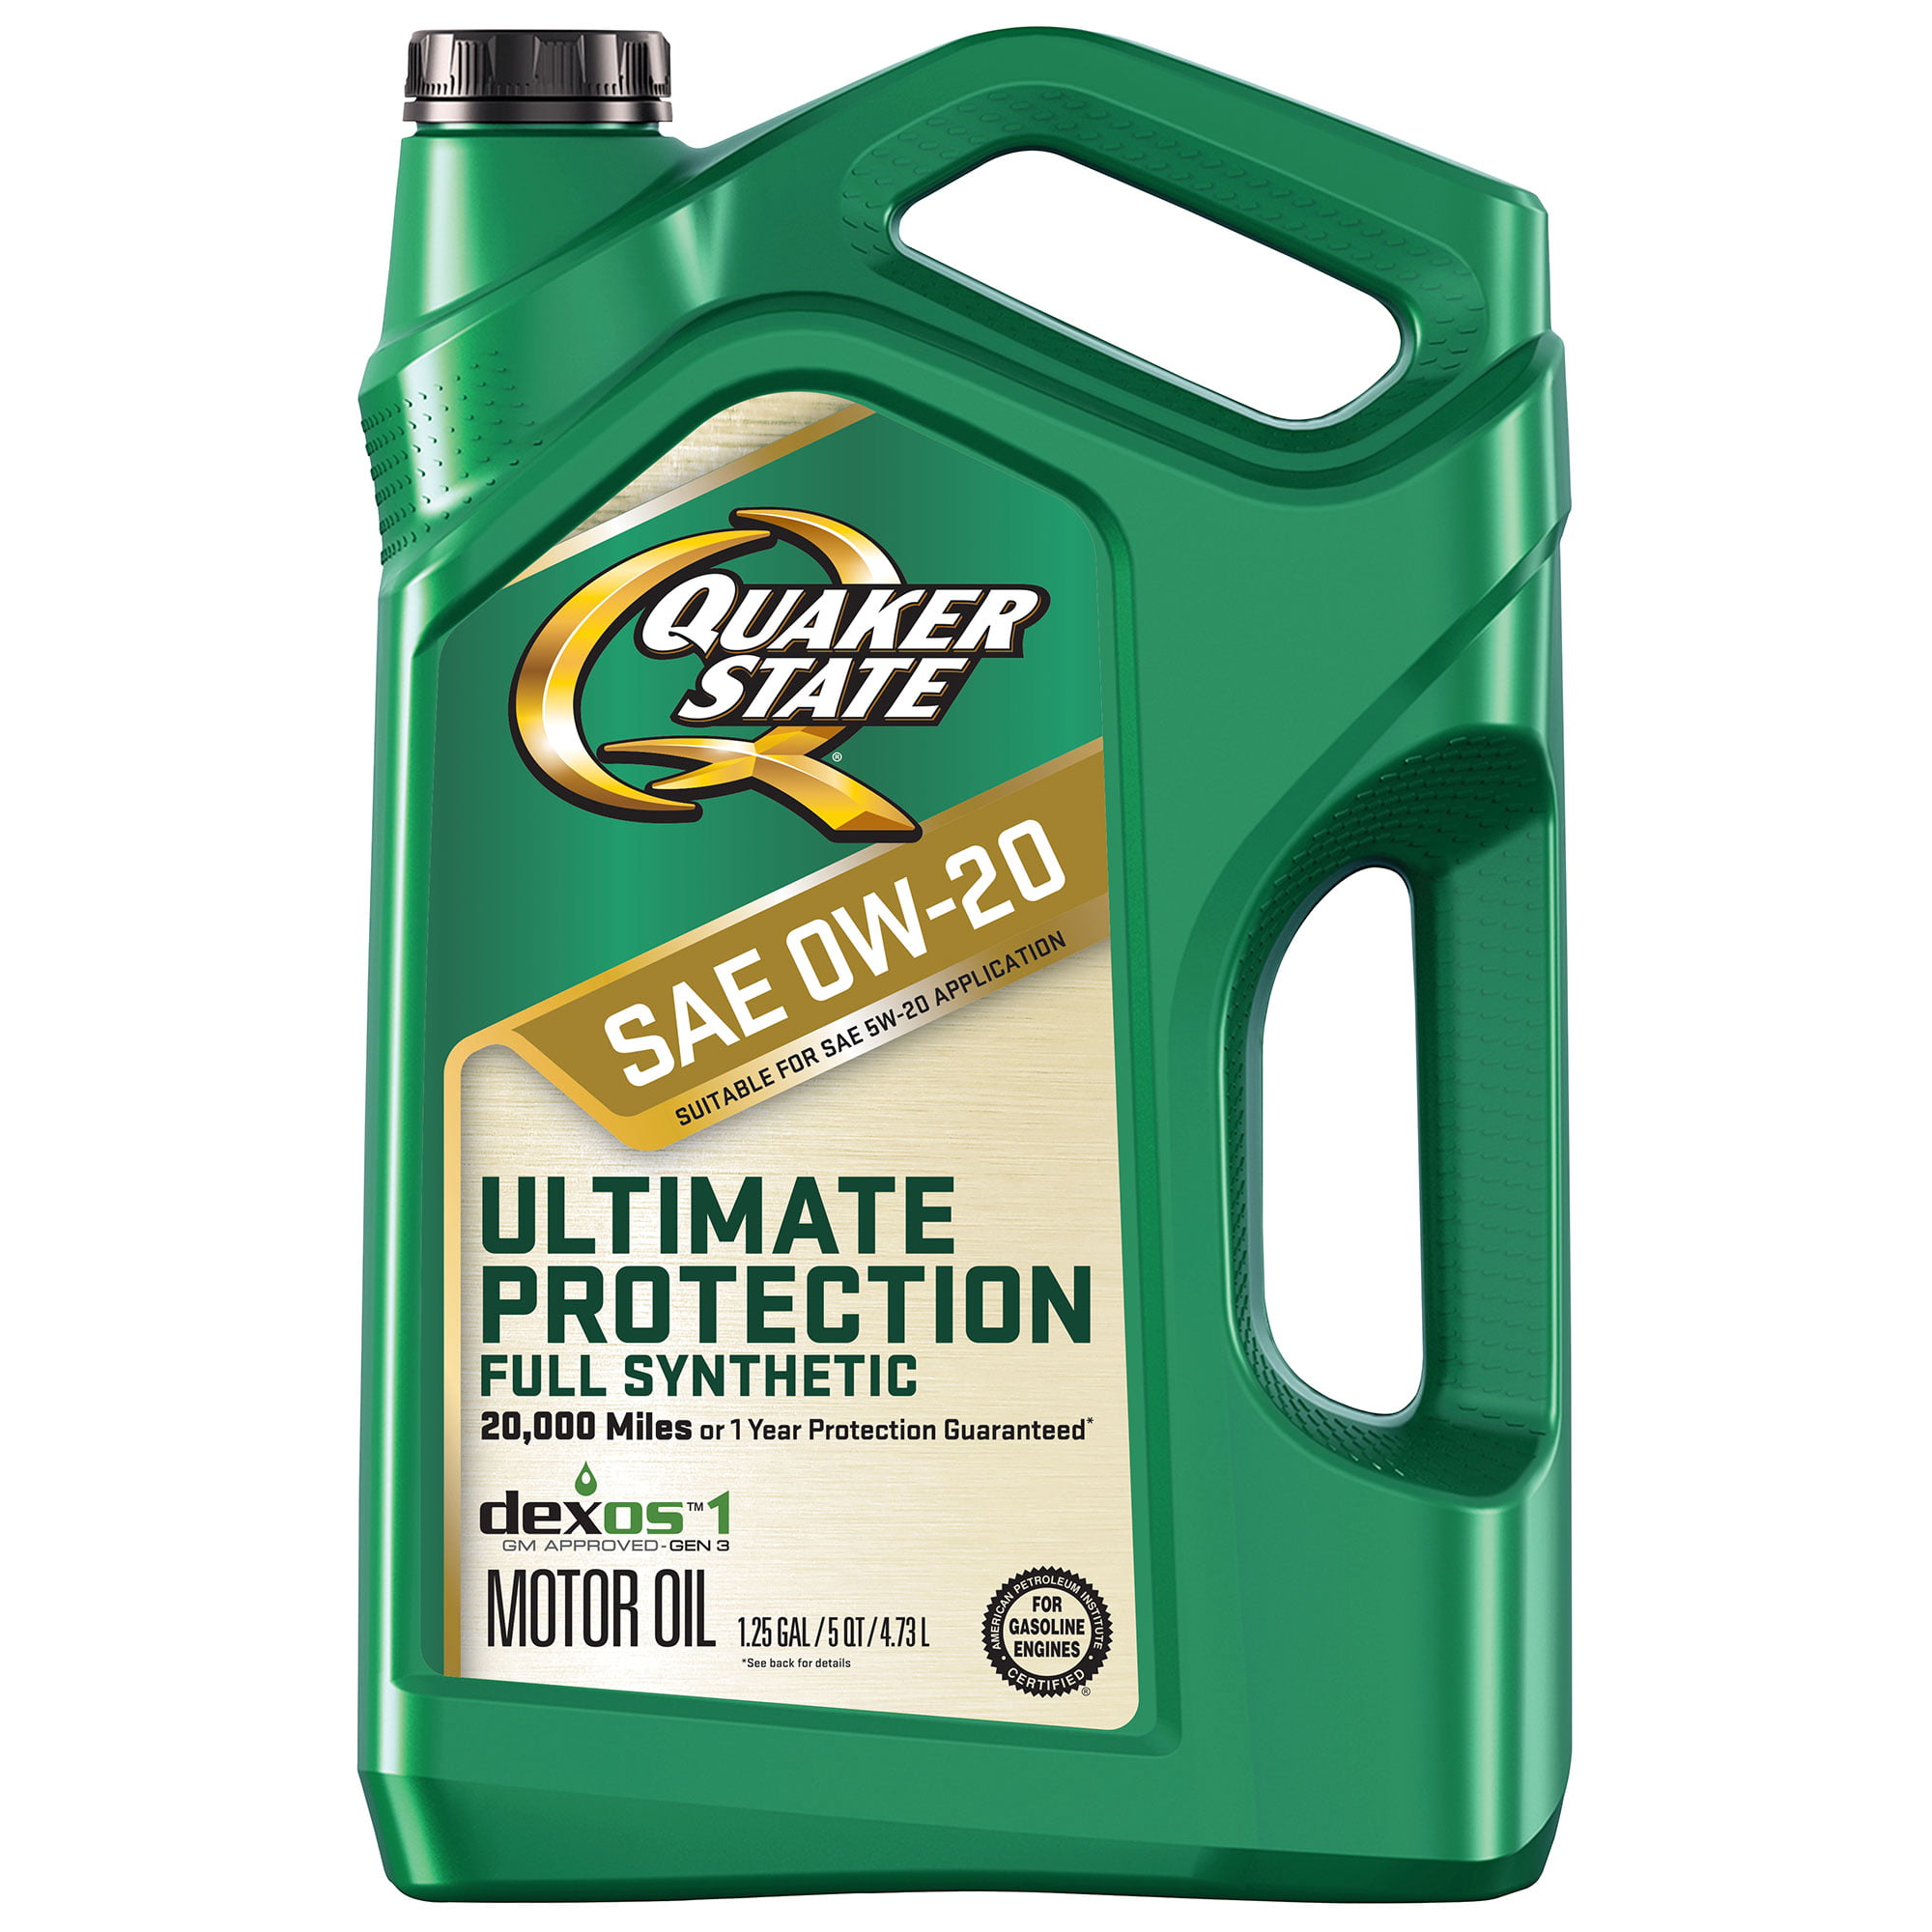 Quaker-State-Ultimate-Protection-Full-Synthetic-0W-20-Motor-Oil-5-Quart_0f550e61-6556-47a2-a048-2ec824ff609c.0a6c90fd8cdd2feed80f6d79541d0aea.jpeg